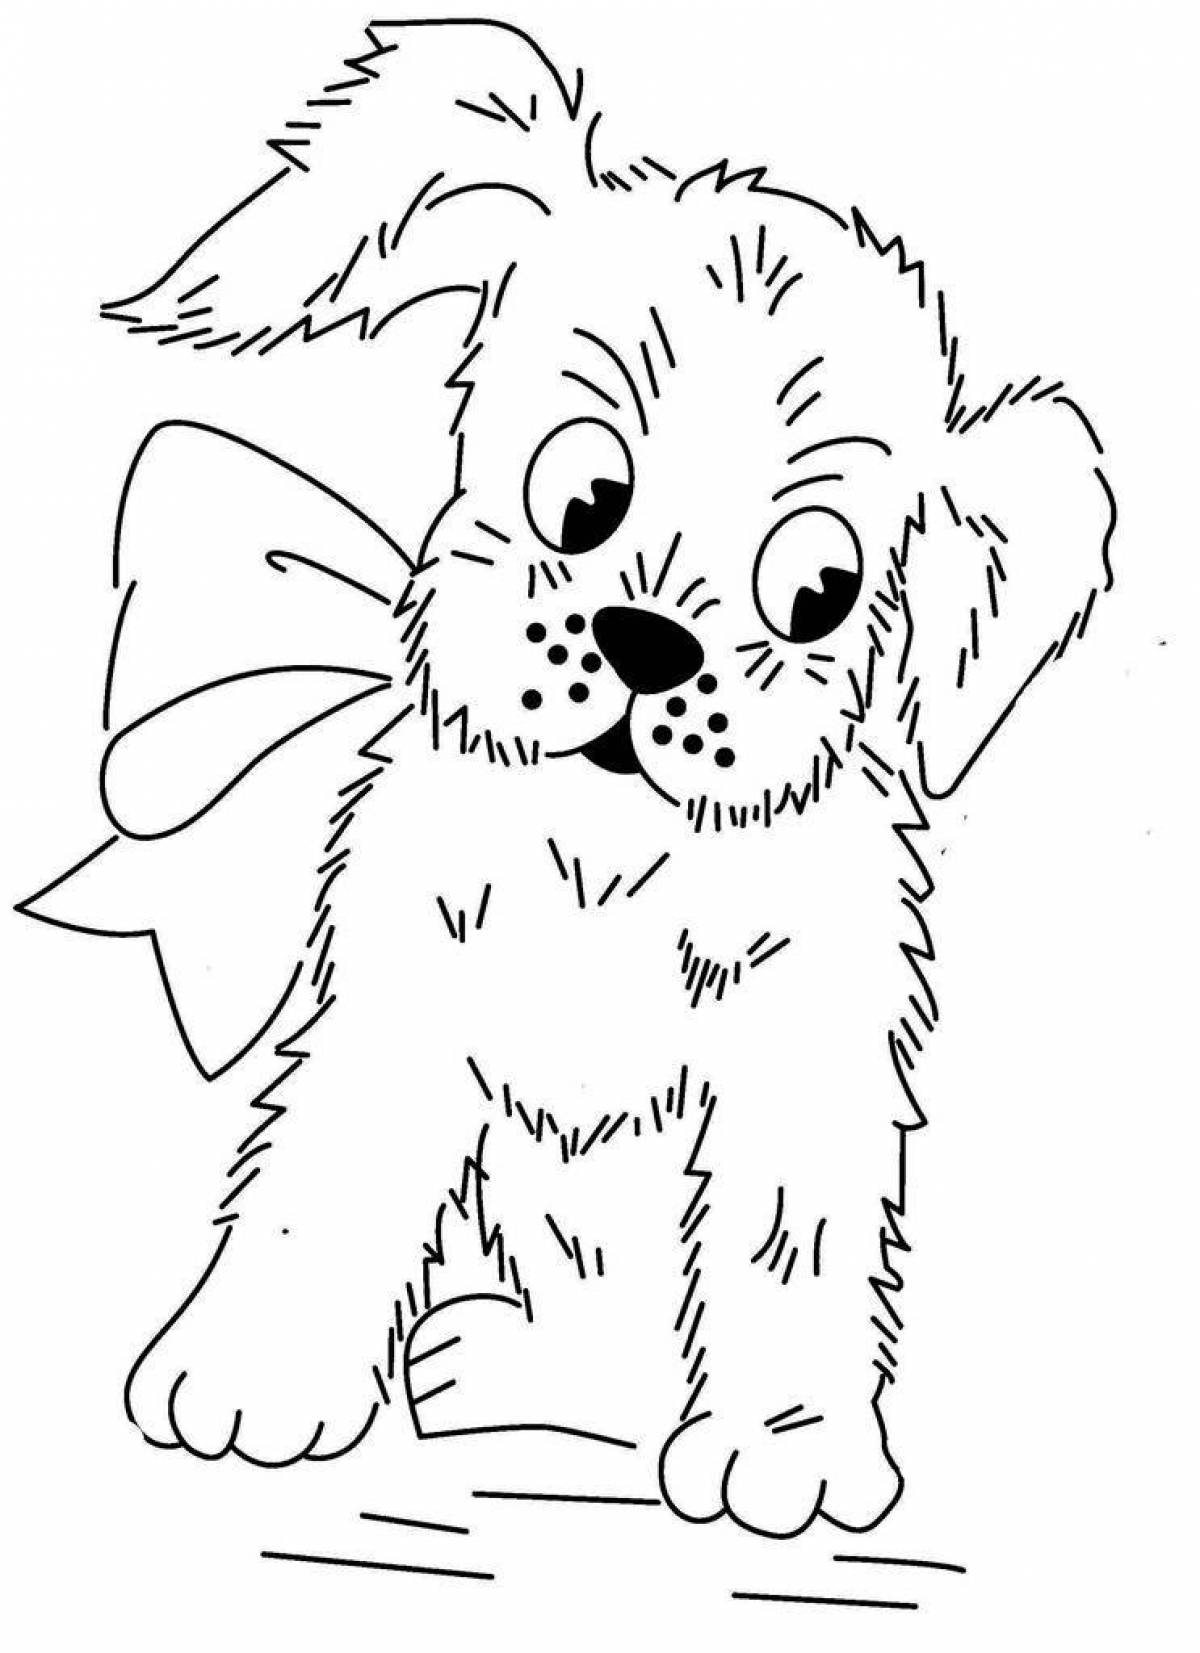 Animated dog and cat coloring page